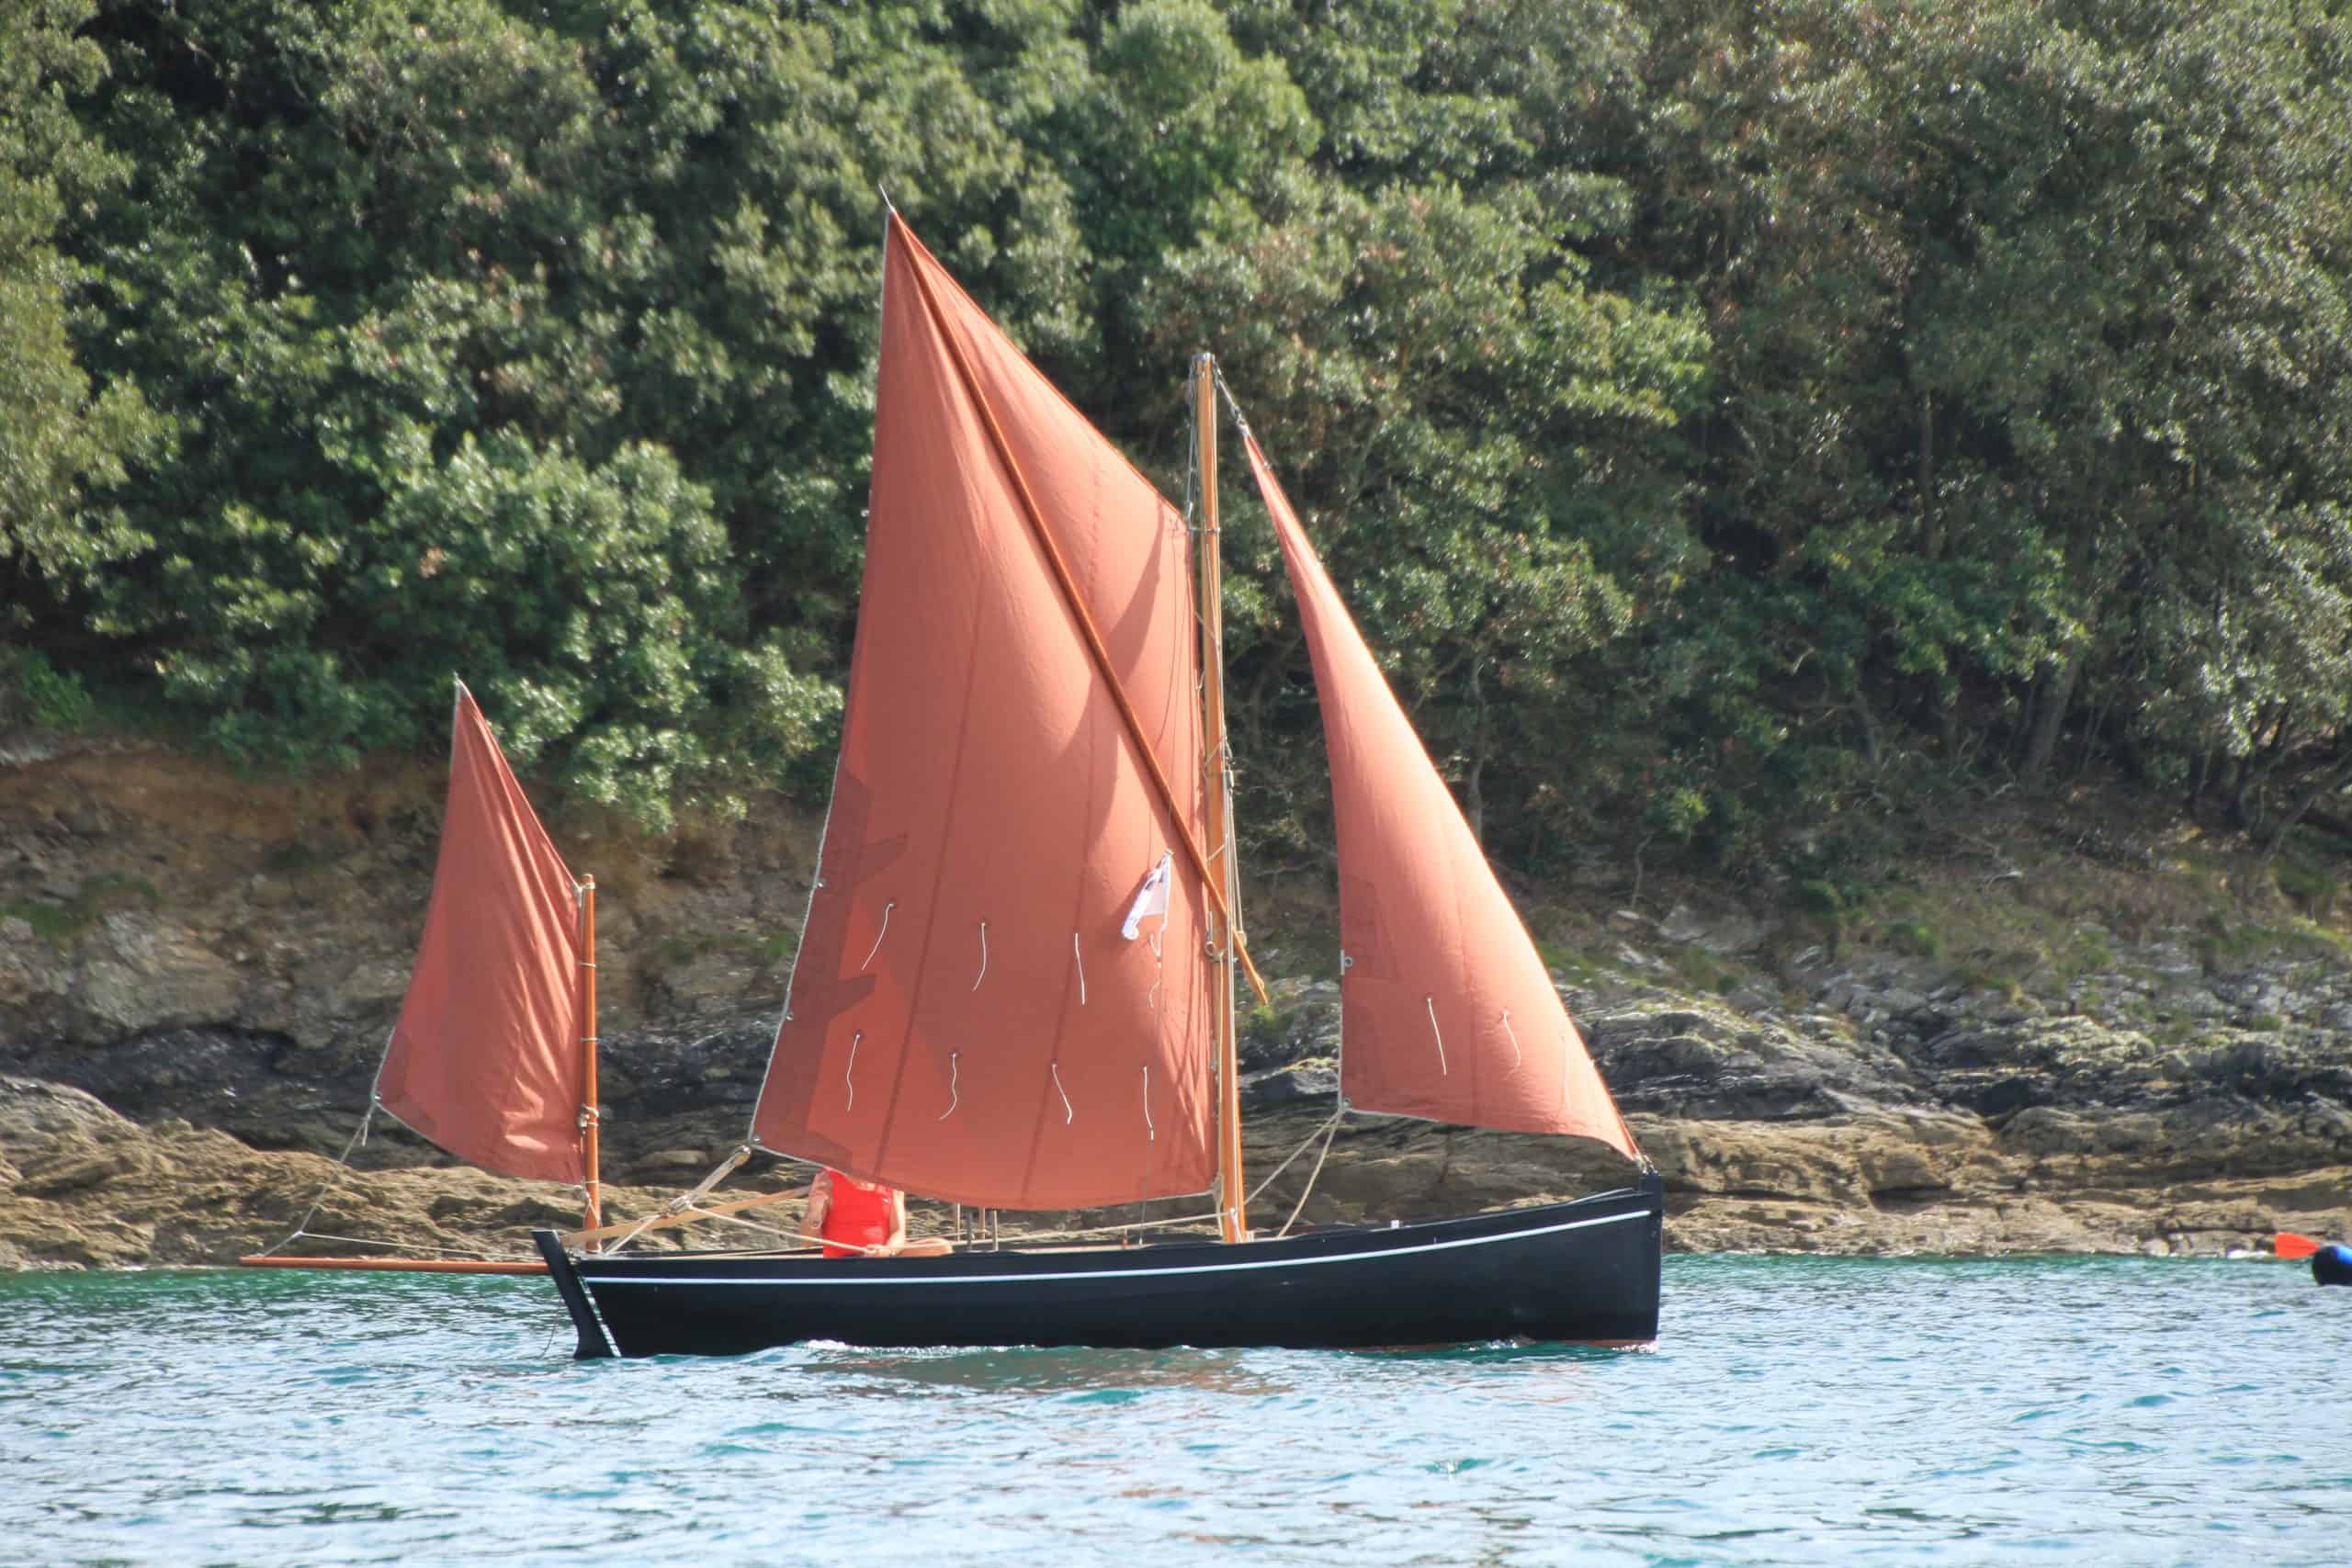 Explore Cornwall intimately on a small boat